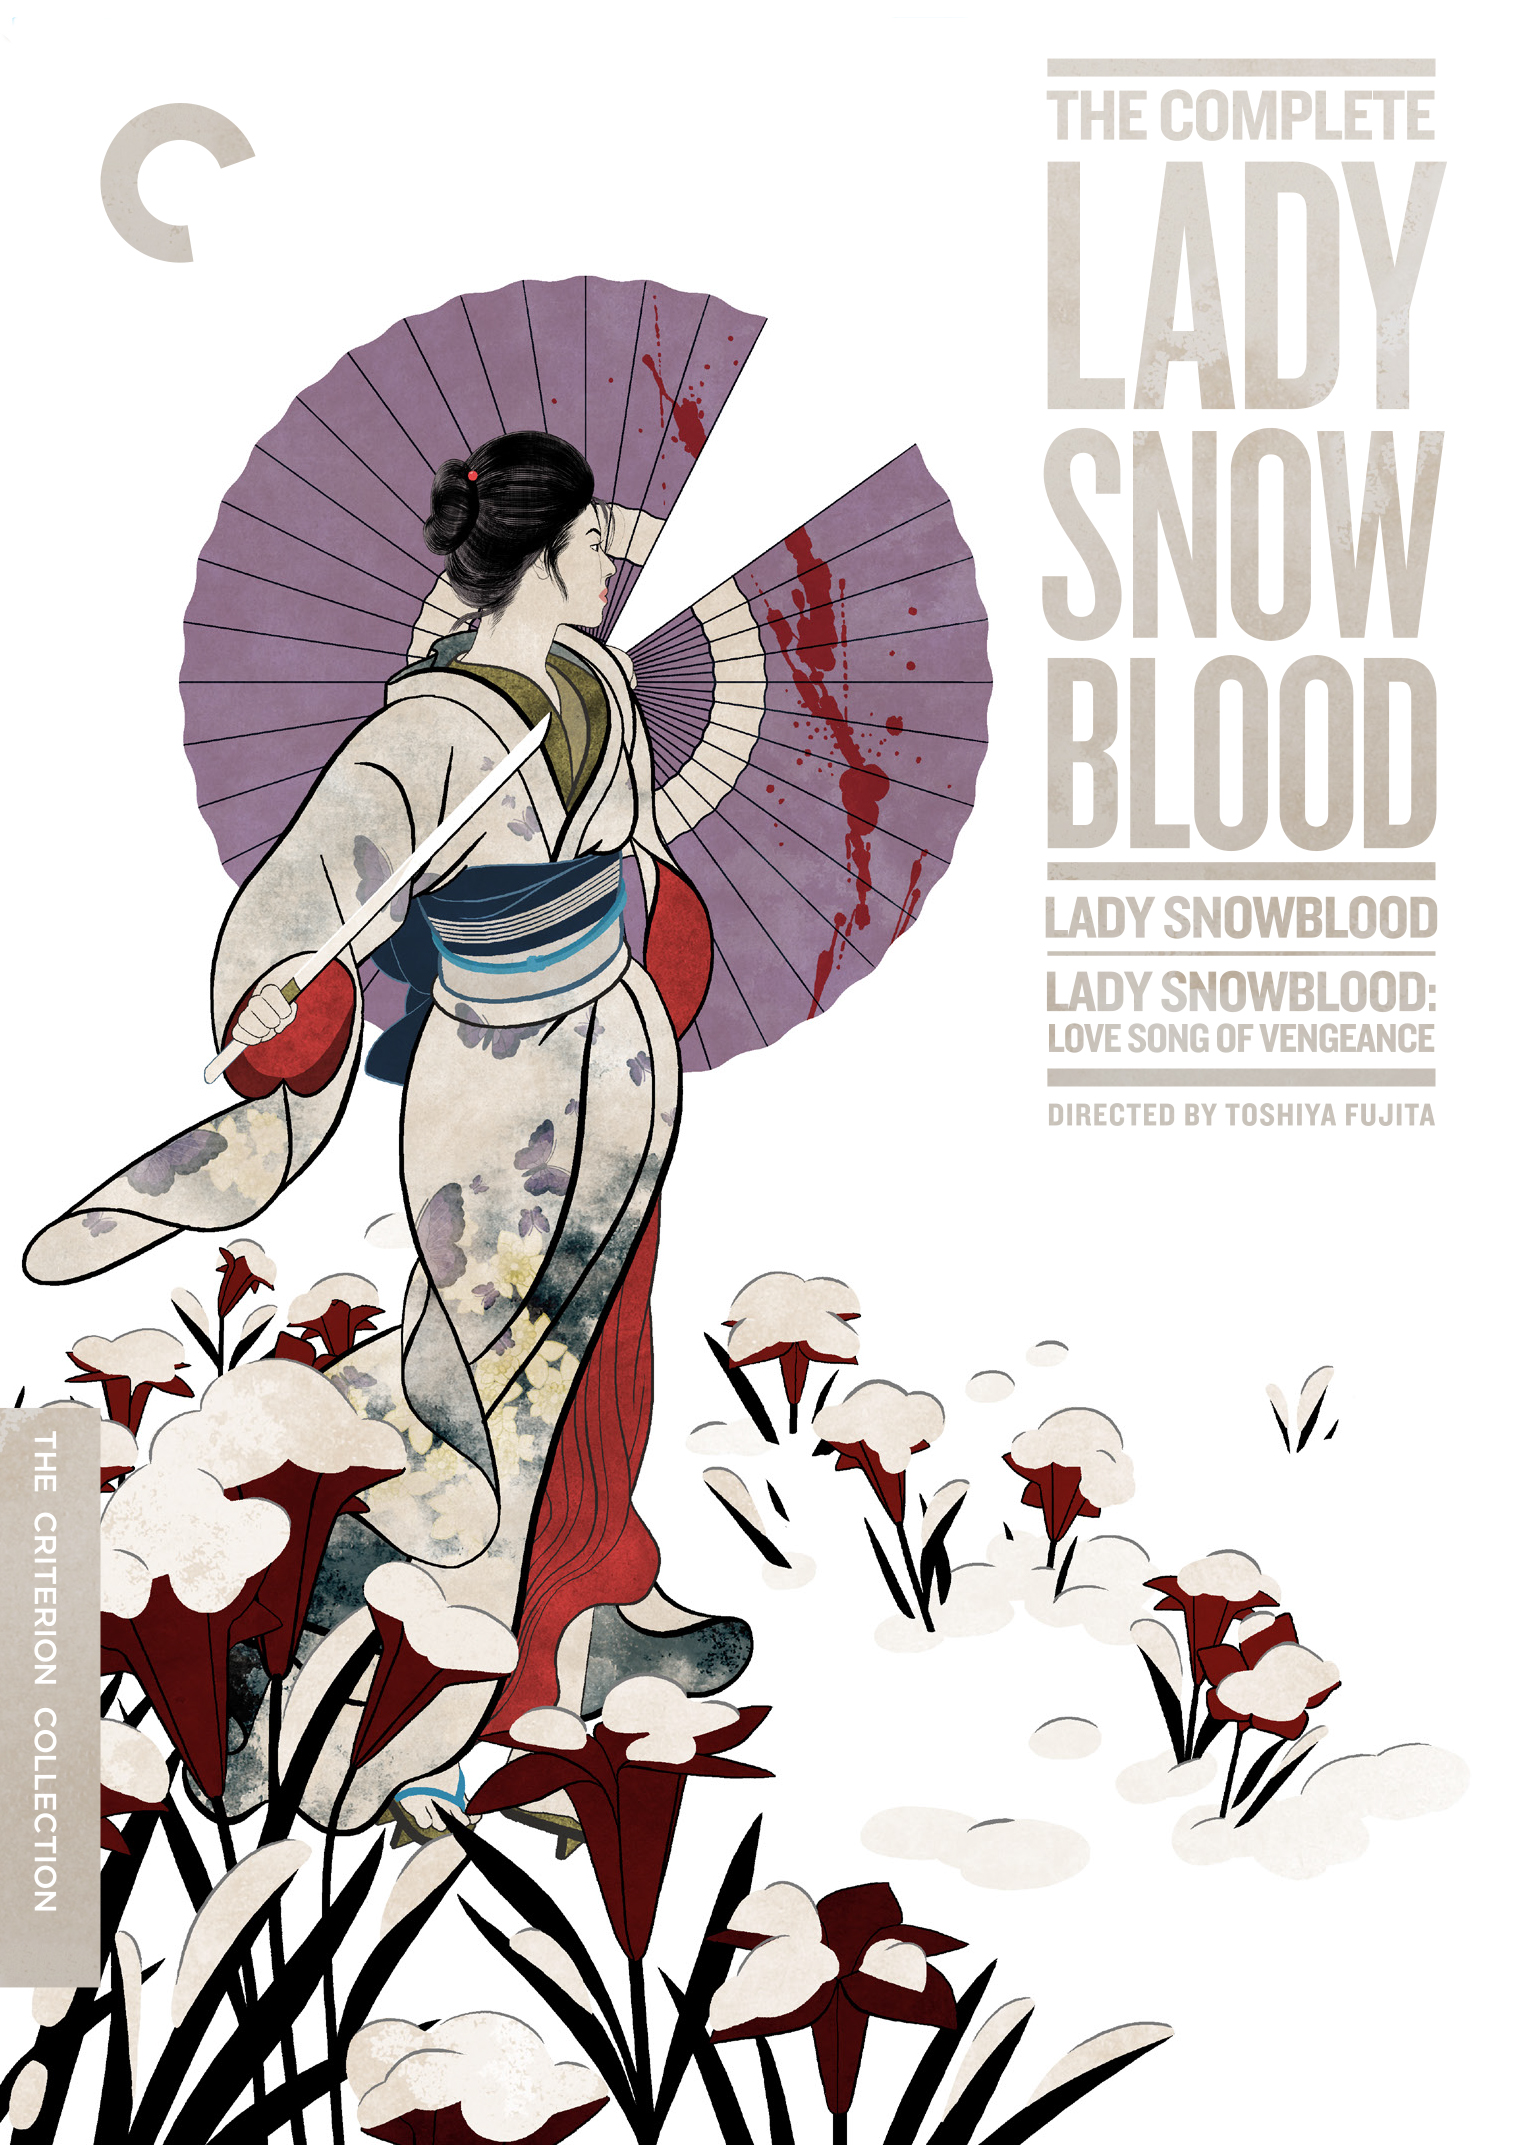 The Complete Lady Snowblood [Criterion Collection] [DVD]